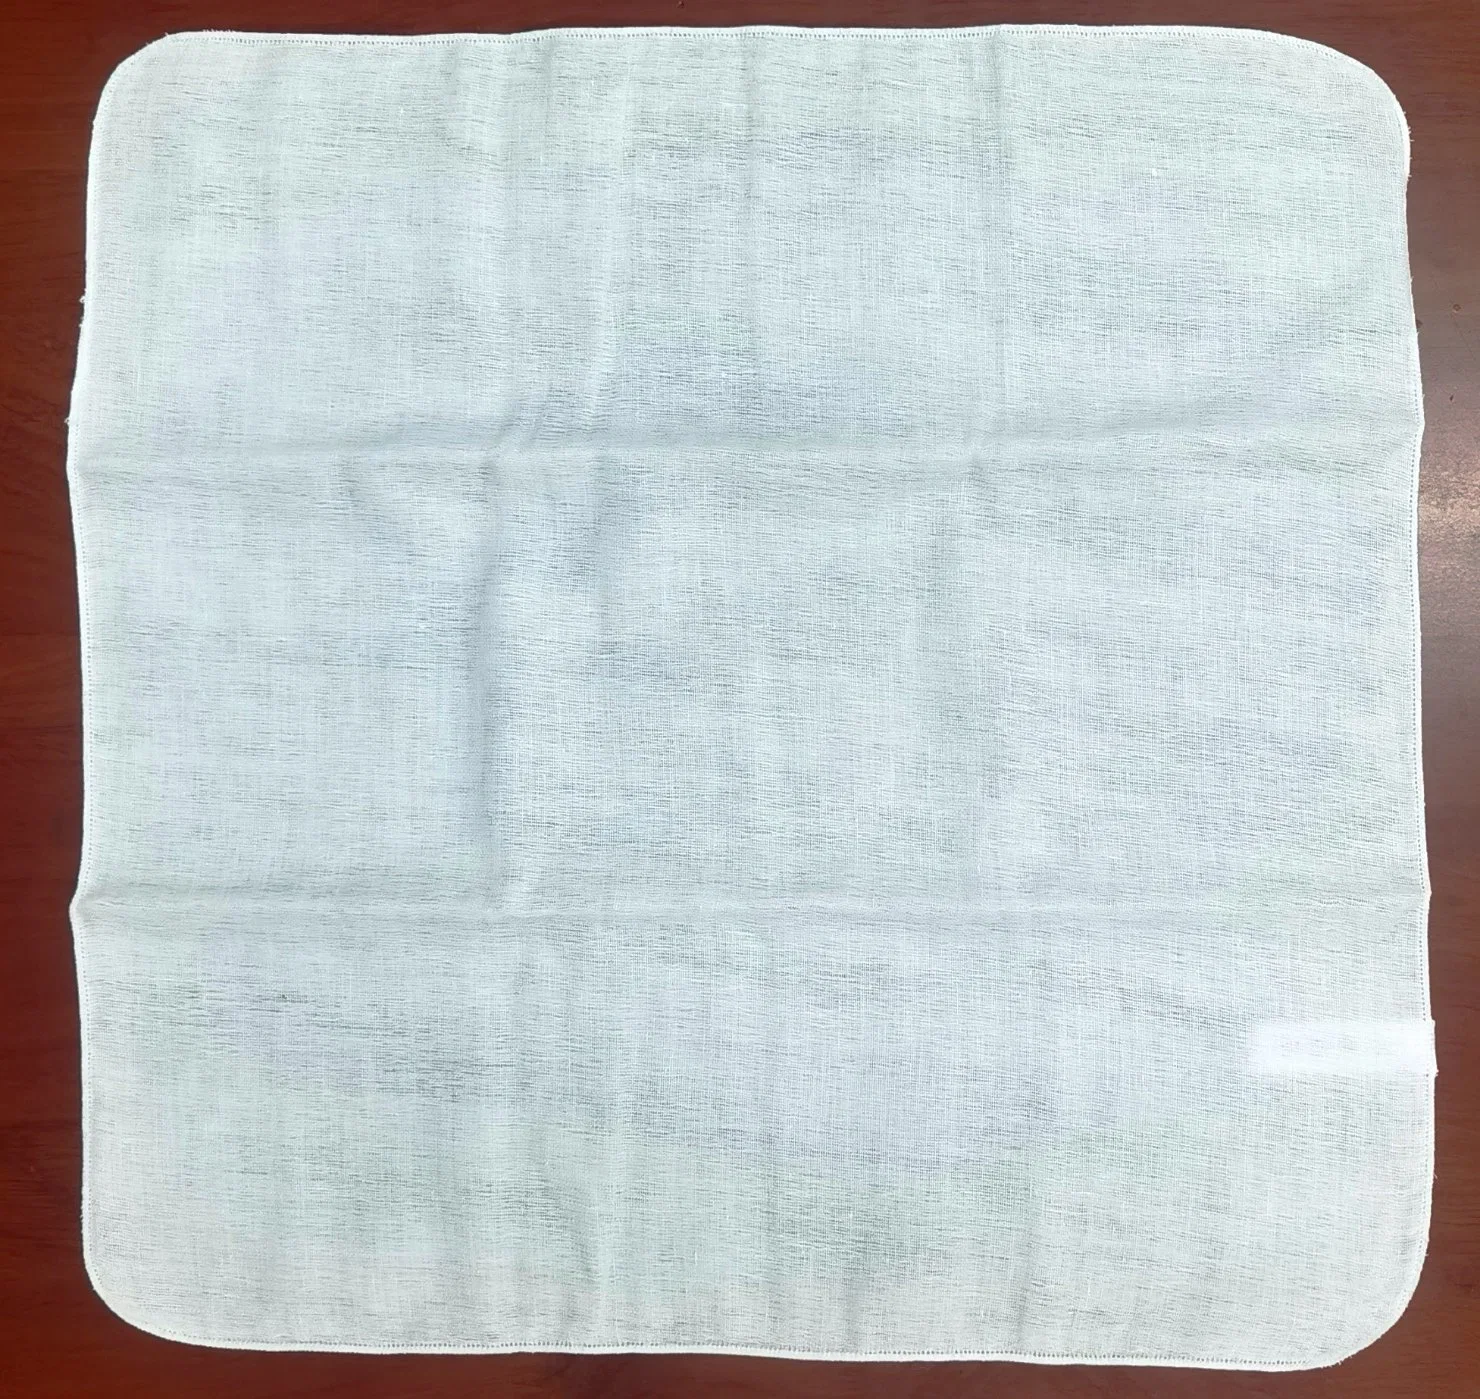 100%Cotton Makeup Removal Facial Cleaning Muslin Cloth